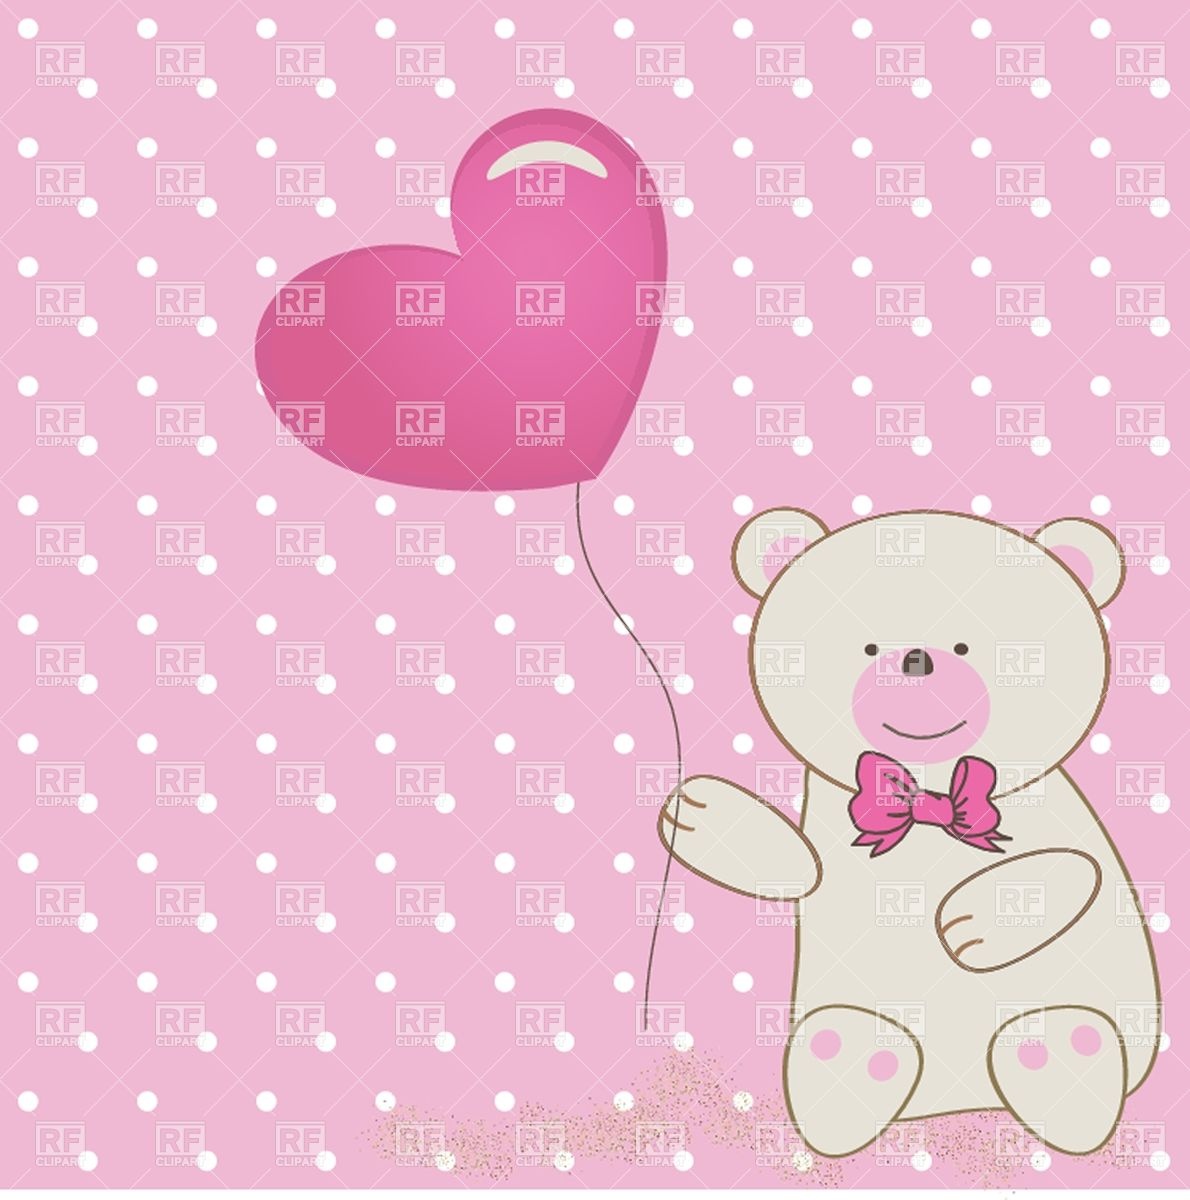 Teddy Bear With Bow Heart Shaped Balloon Plants And Animals Download